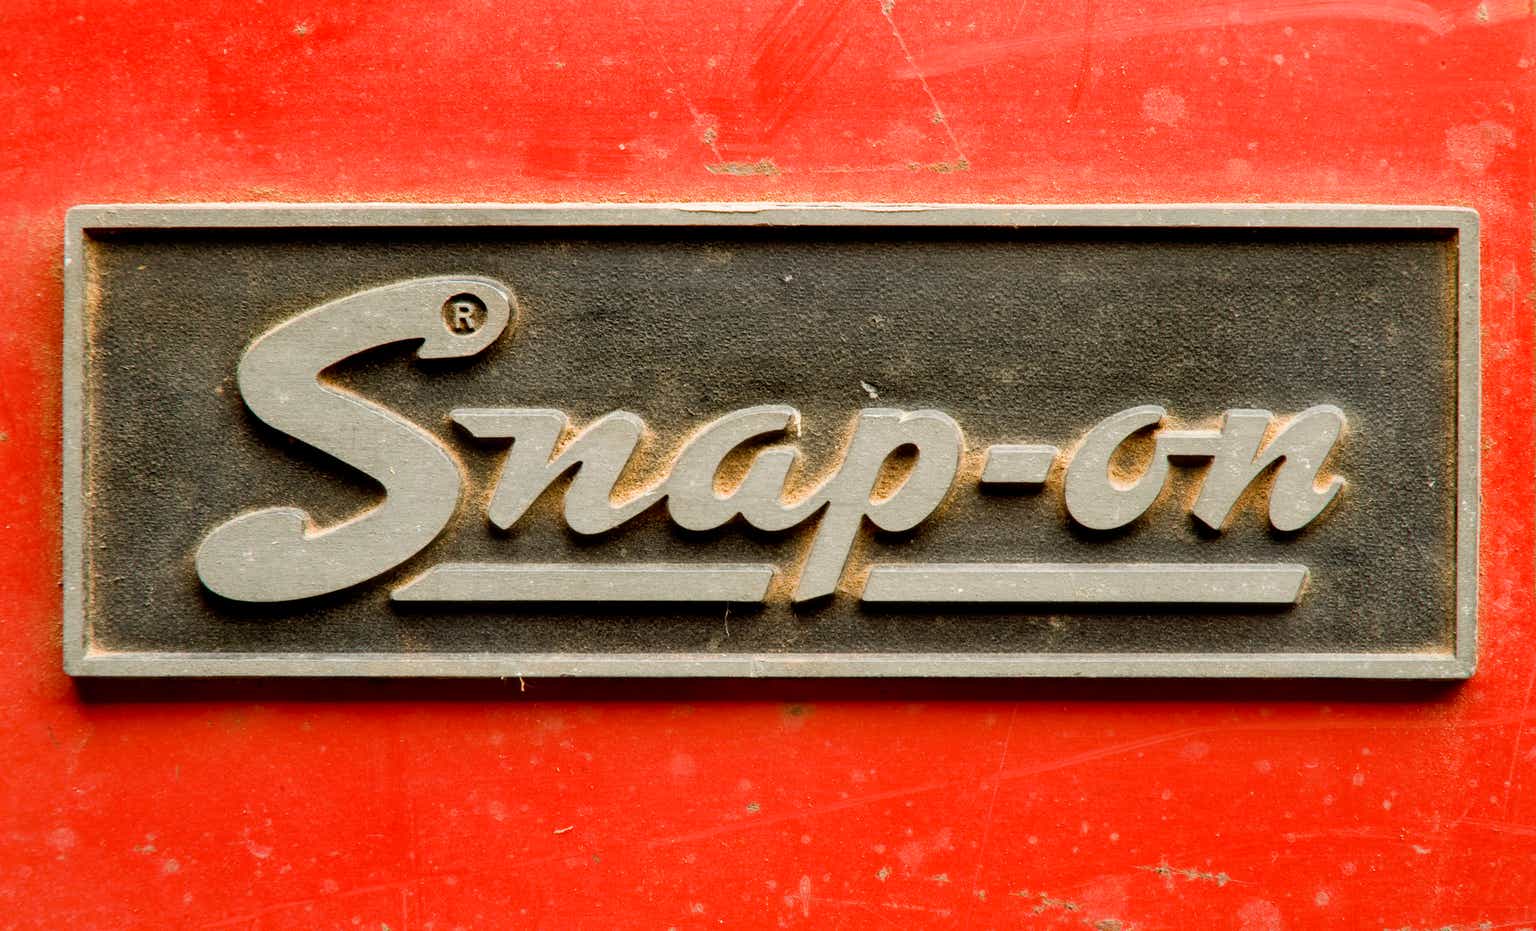 Snap-on: I Am Hoping To Buy During The Upcoming Recession